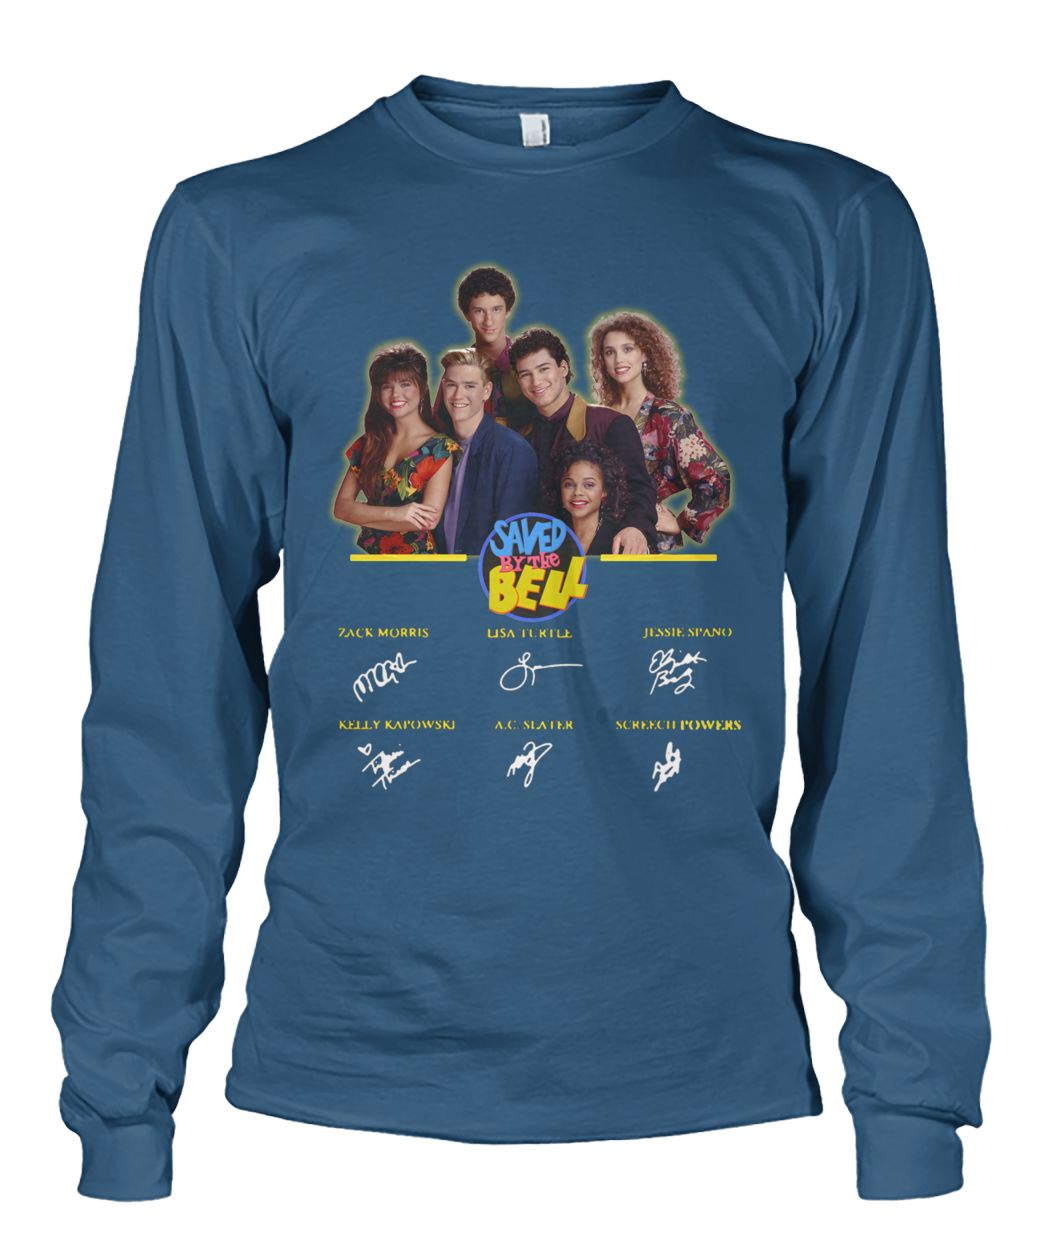 Saved by the bell characters signatures unisex long sleeve